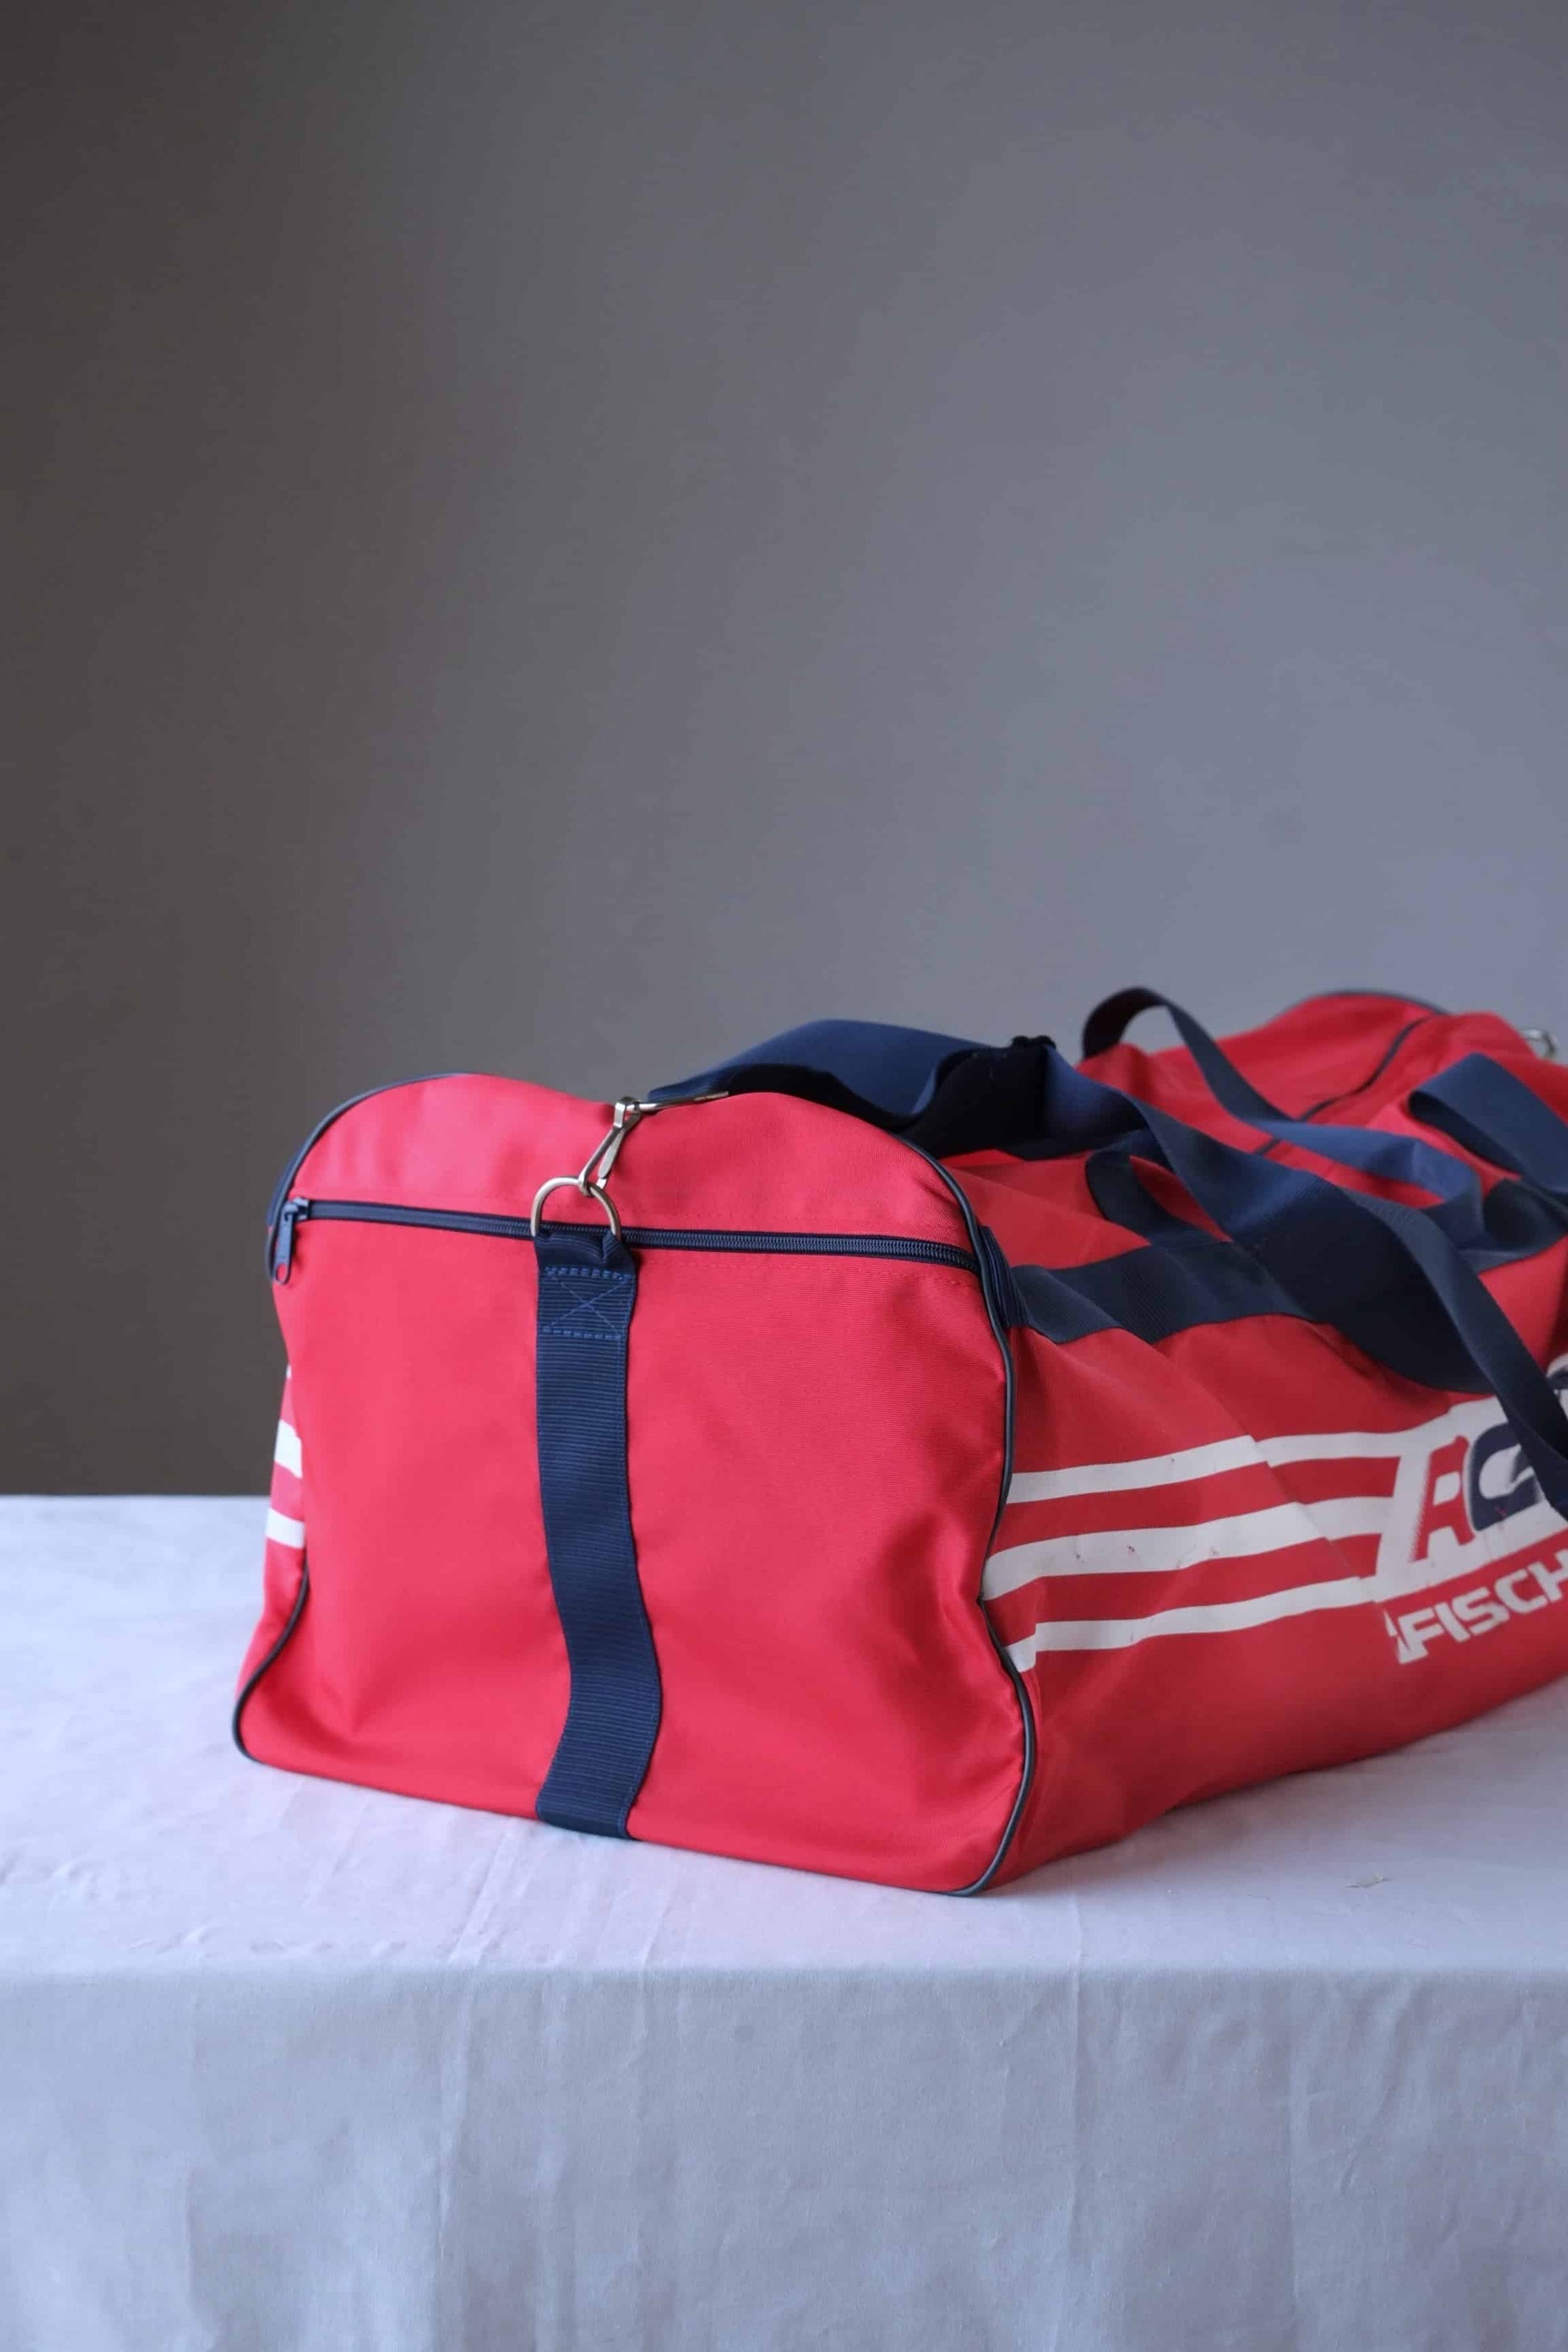 Vintage Fischer Duffle Bag side red and navy